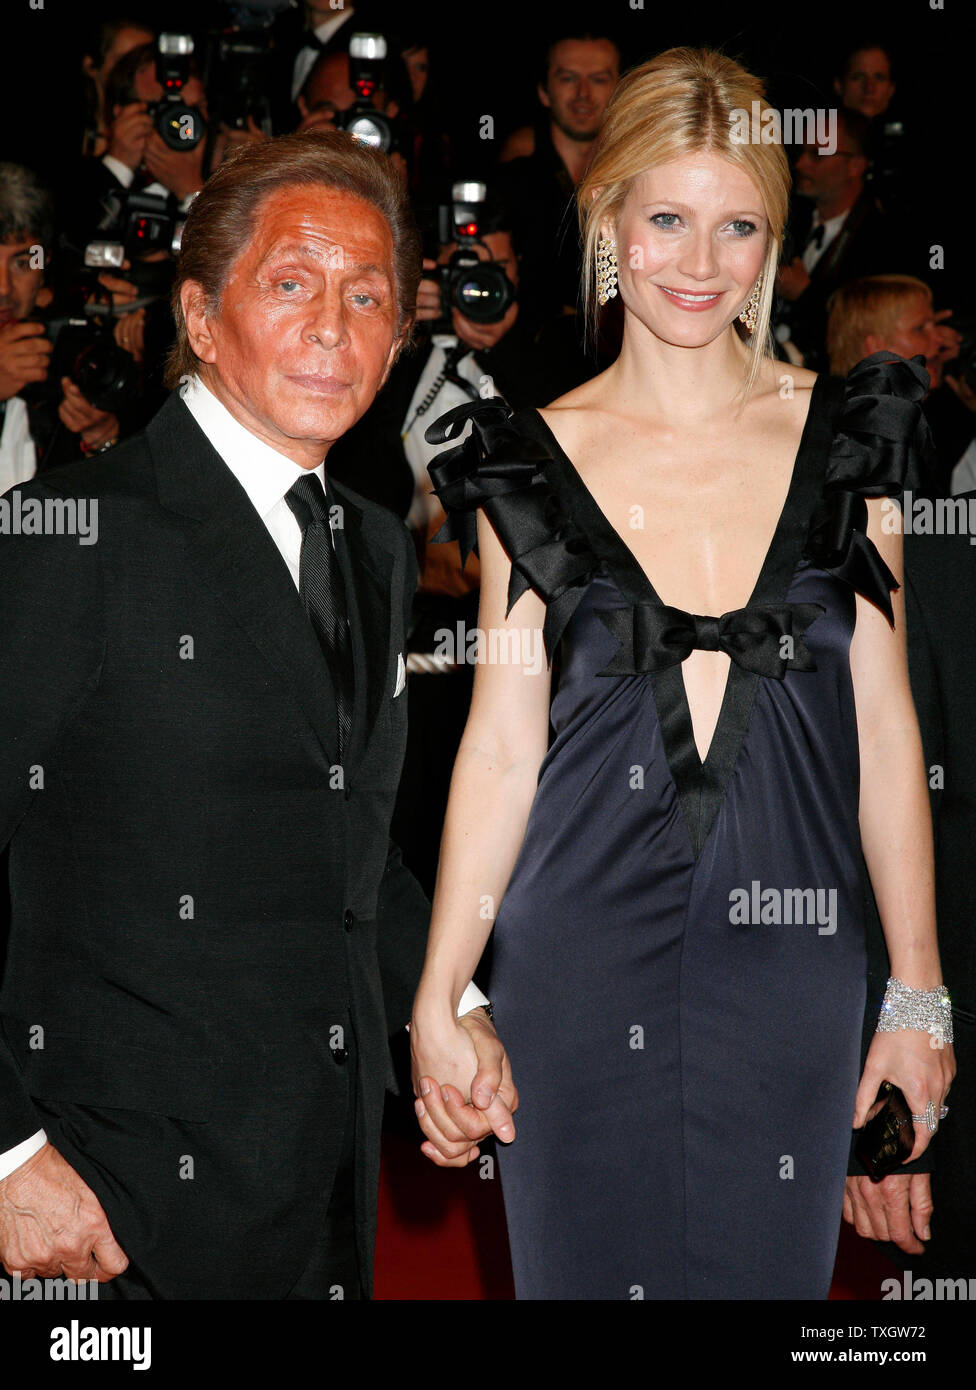 Fashion designer Valentino Garavani and actress Gwyneth Paltrow arrive on  the red carpet before a screening of the film 